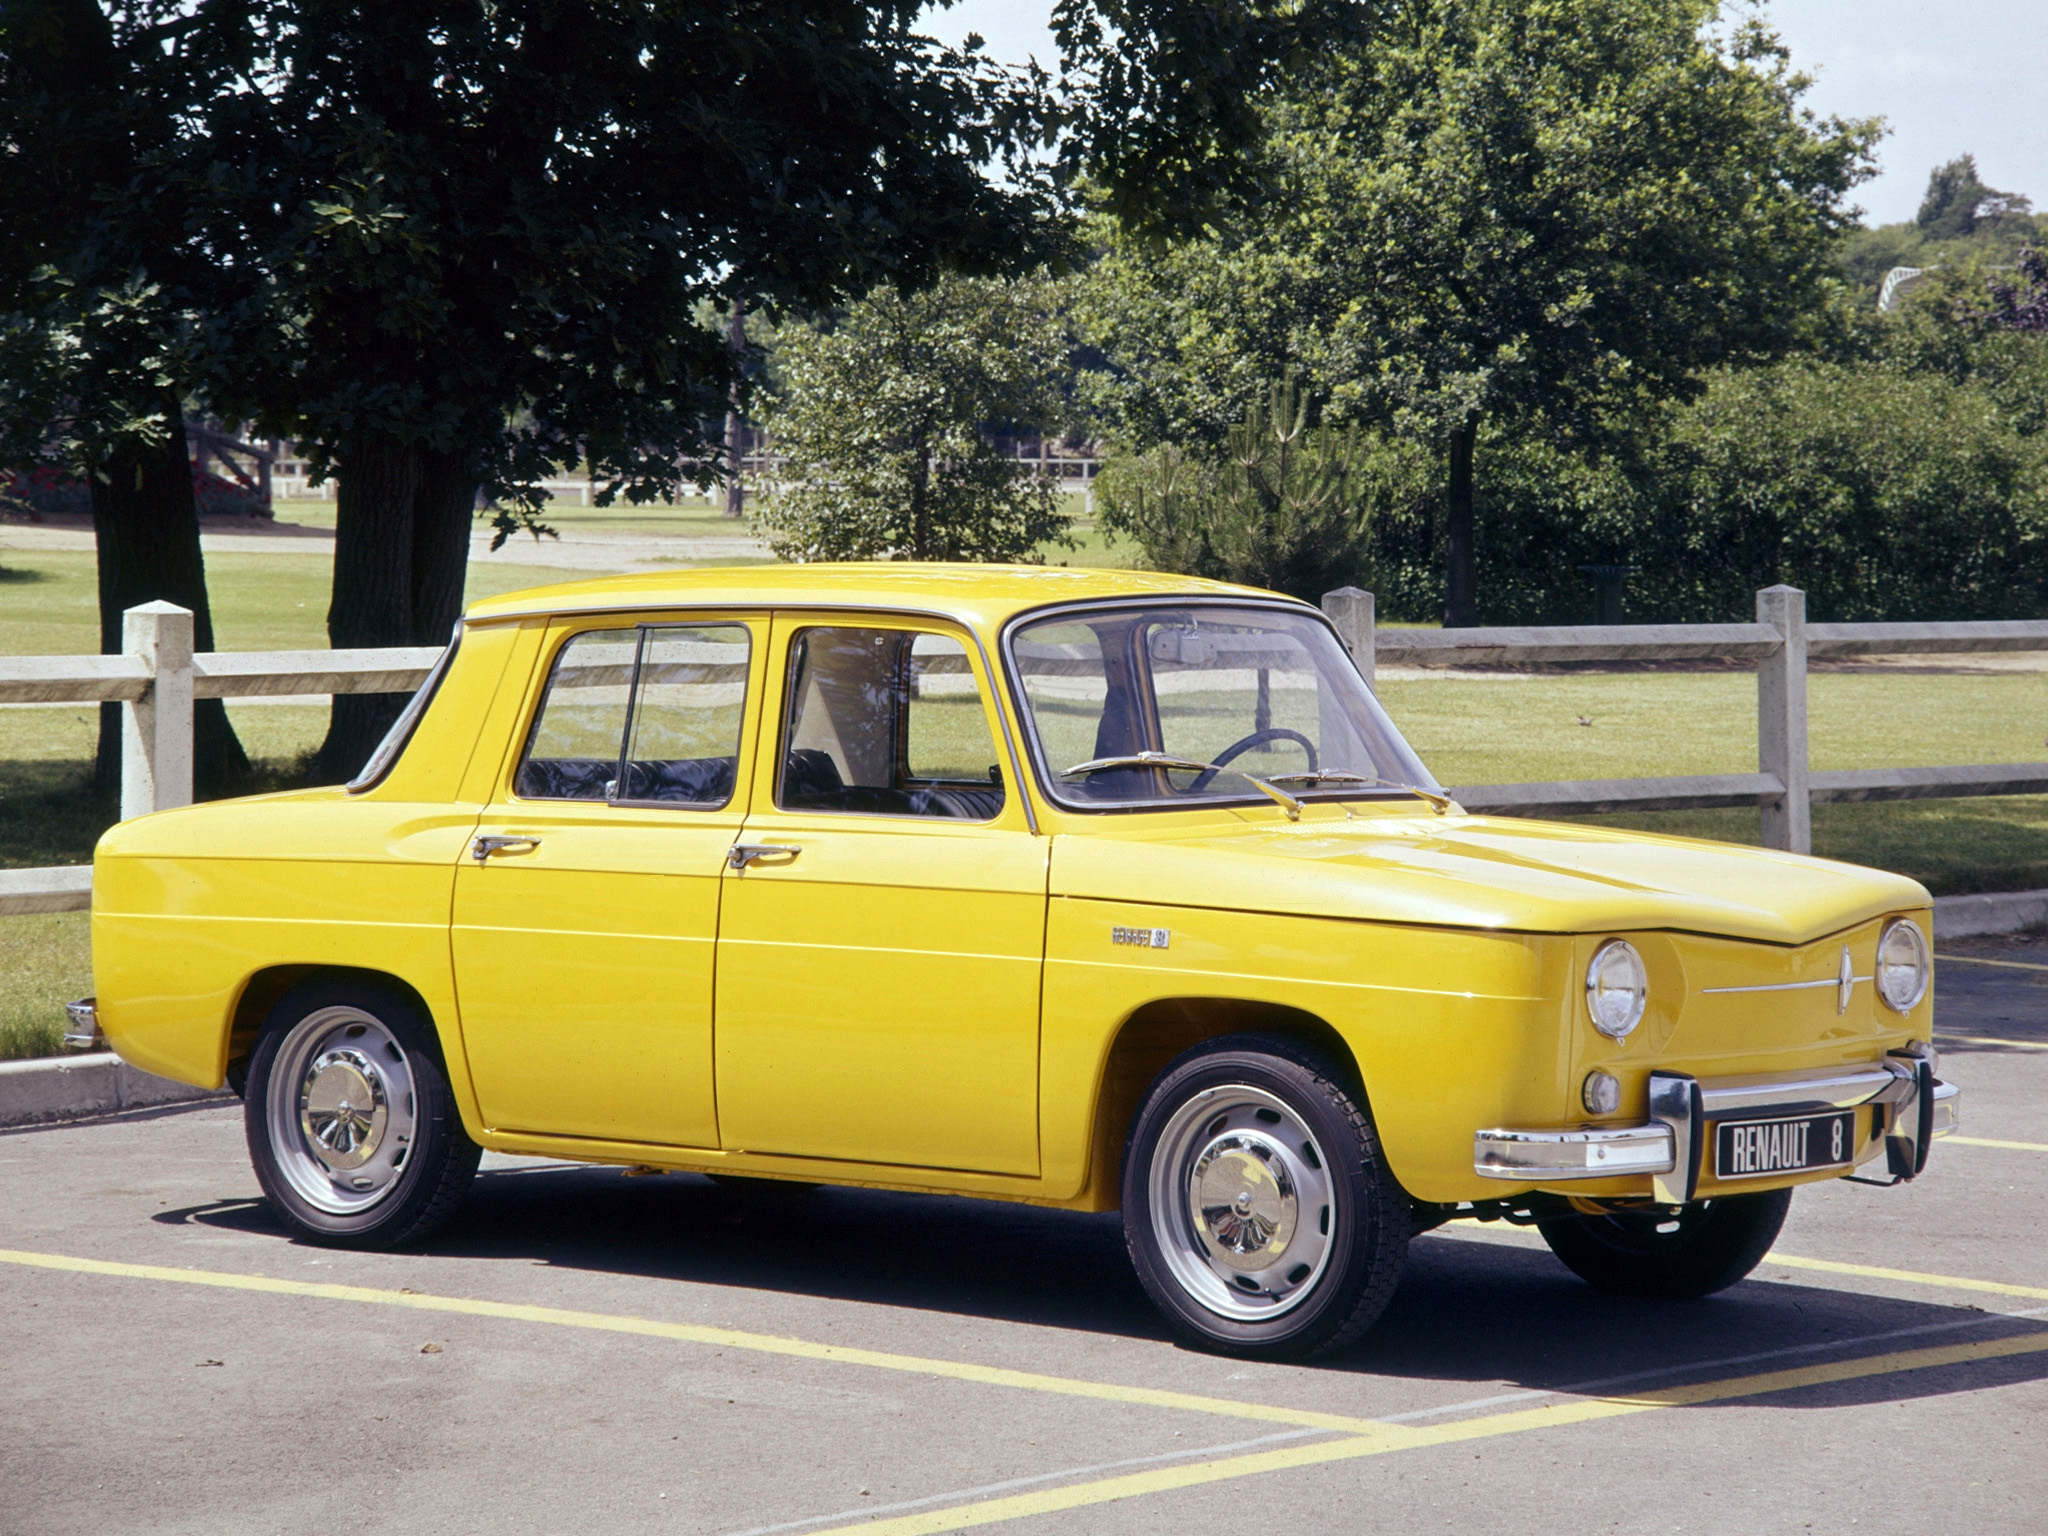 Renault 8 has a very long life